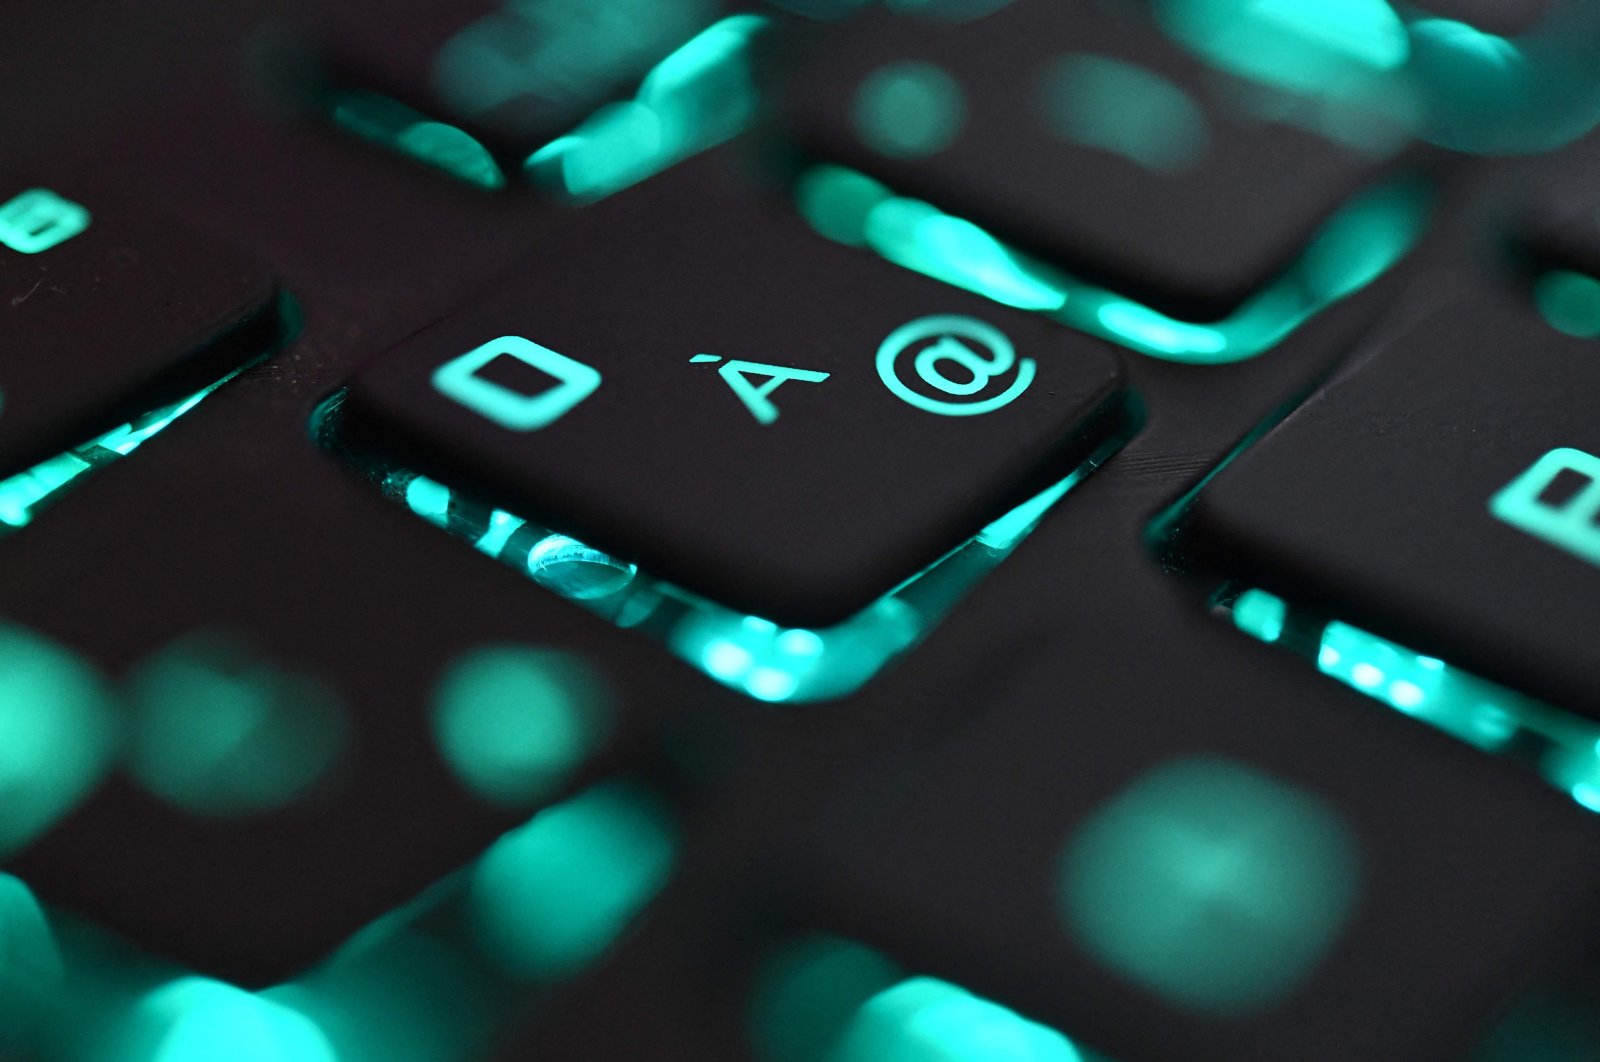 A close-up view of a computer keyboard, June 25, 2019 in Brest. (AFP Photo)